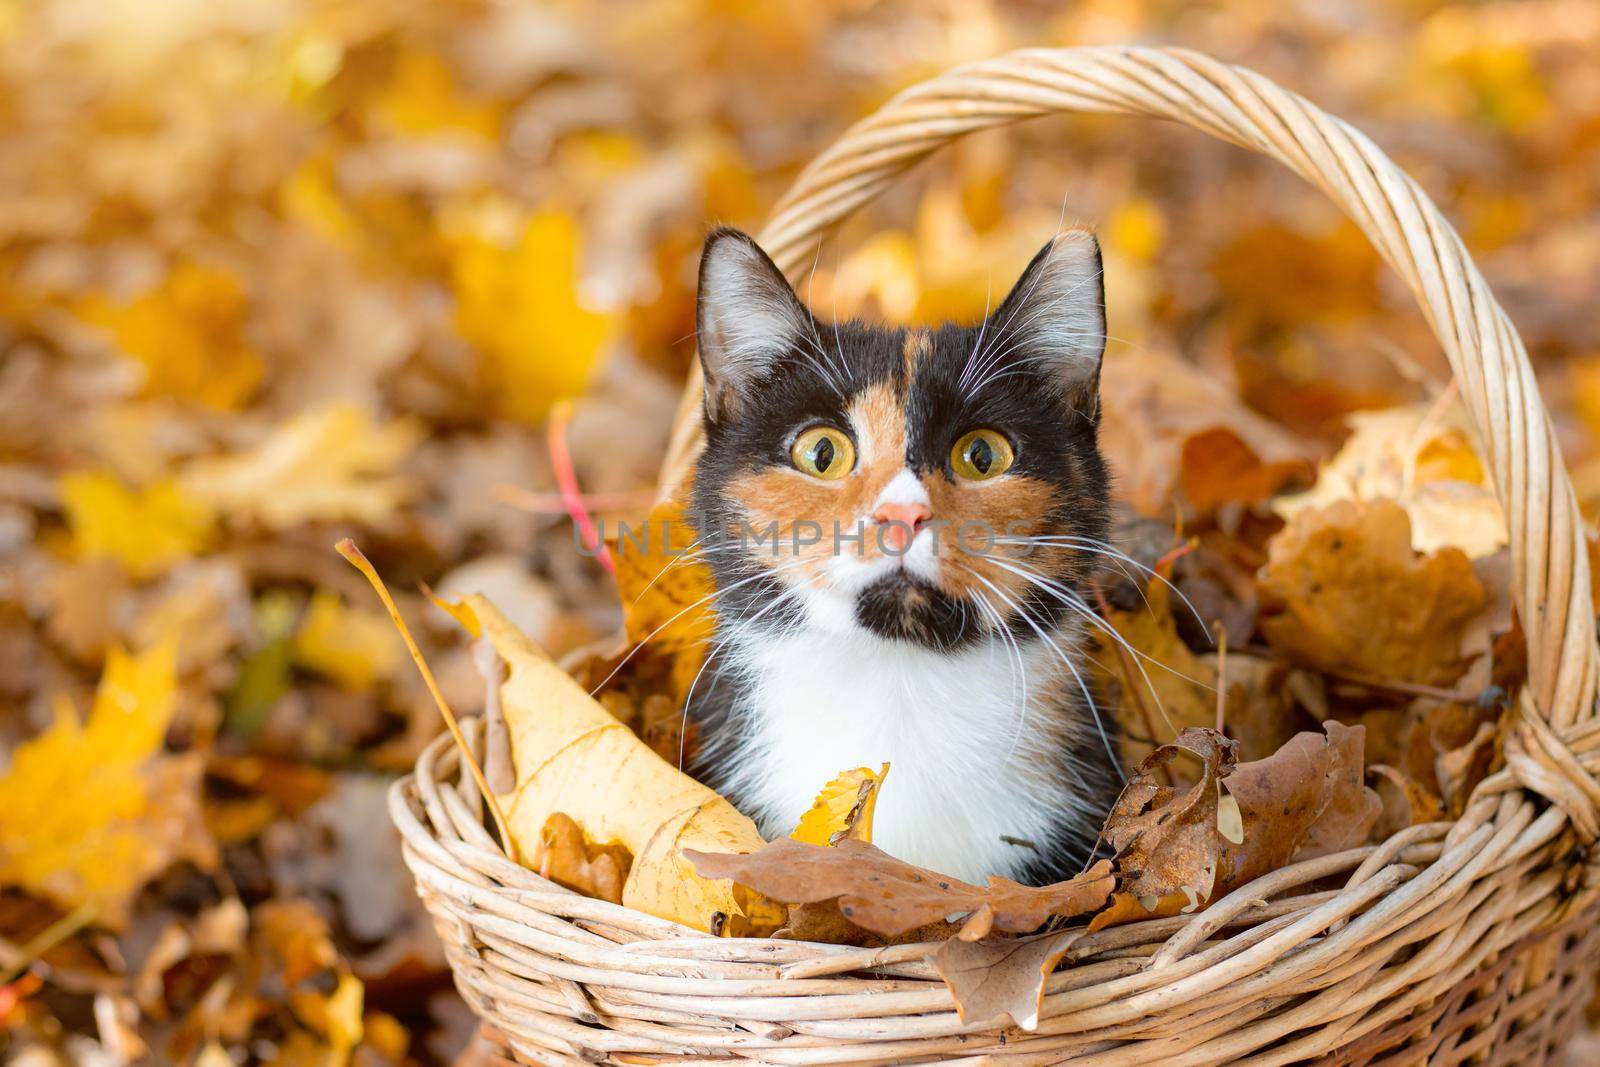 Cat in the basket. Cat sitting in a basket and autumn leaves . A young colored cat. Autumn leave. Cat in the basket. Walking a pet. Article about cats and autumn. Yellow fallen leaves. Photos for printed products by alenka2194